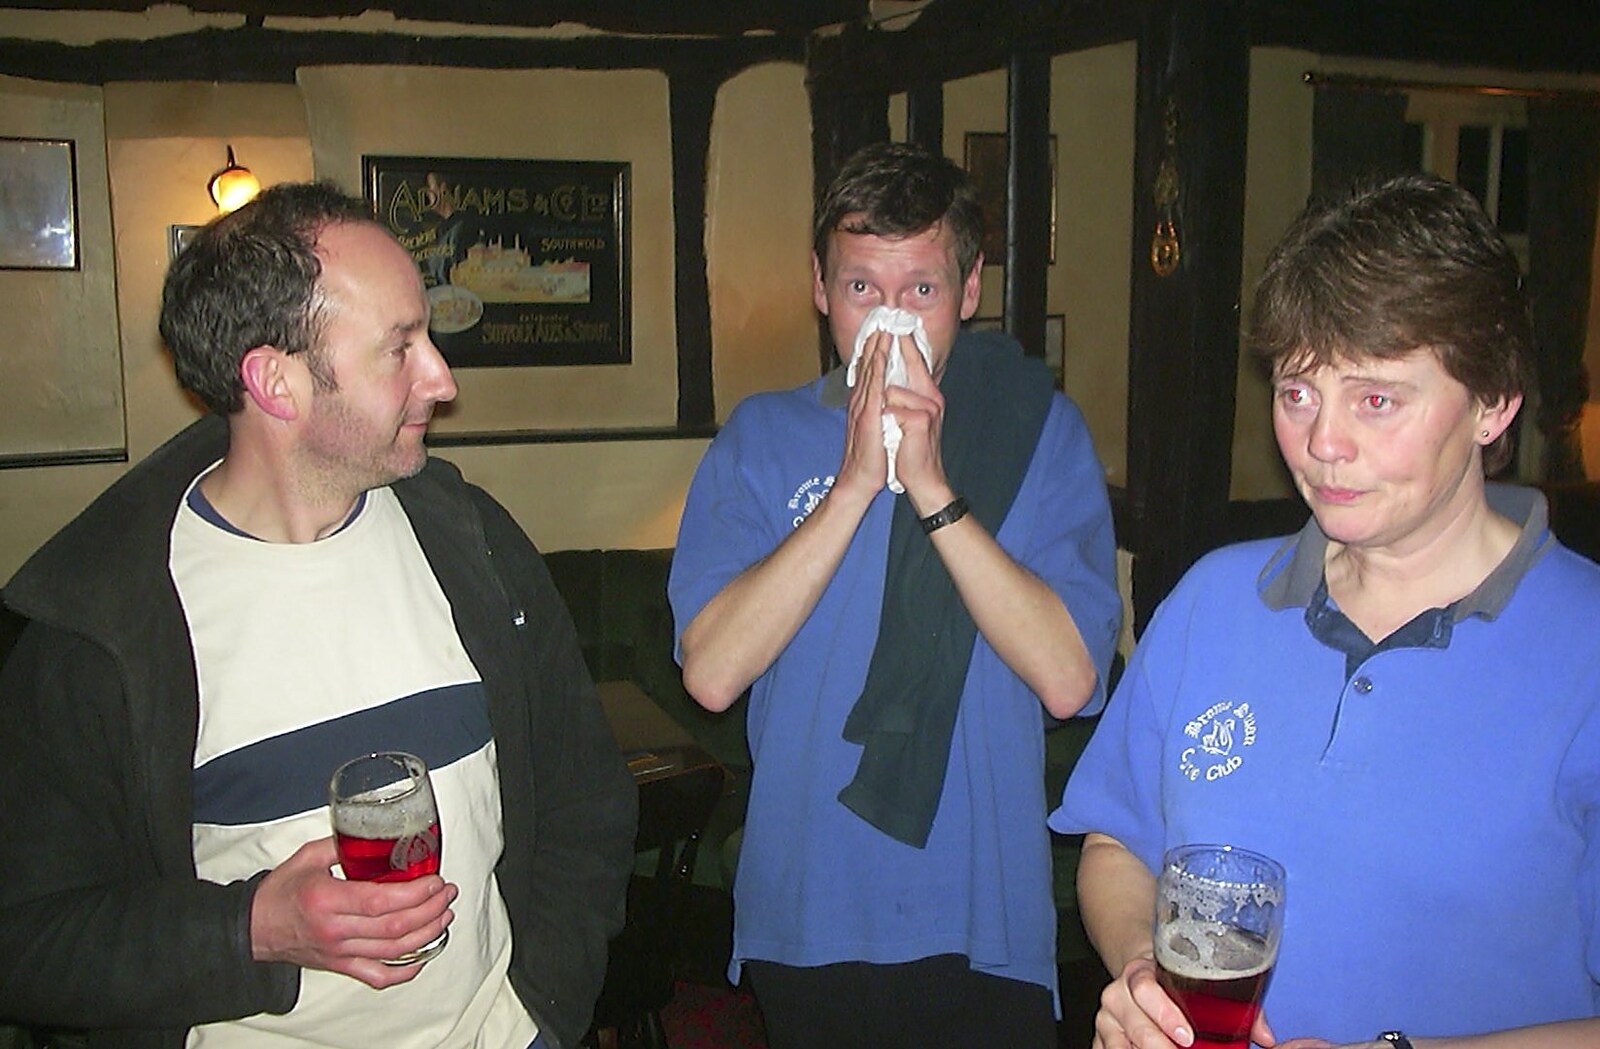 Over in the Needham Red Lion, Apple blows his nose from Wednesday and Thursday: The BSCC Season Opens, and Stuff Happens, Suffolk - 9th April 2004